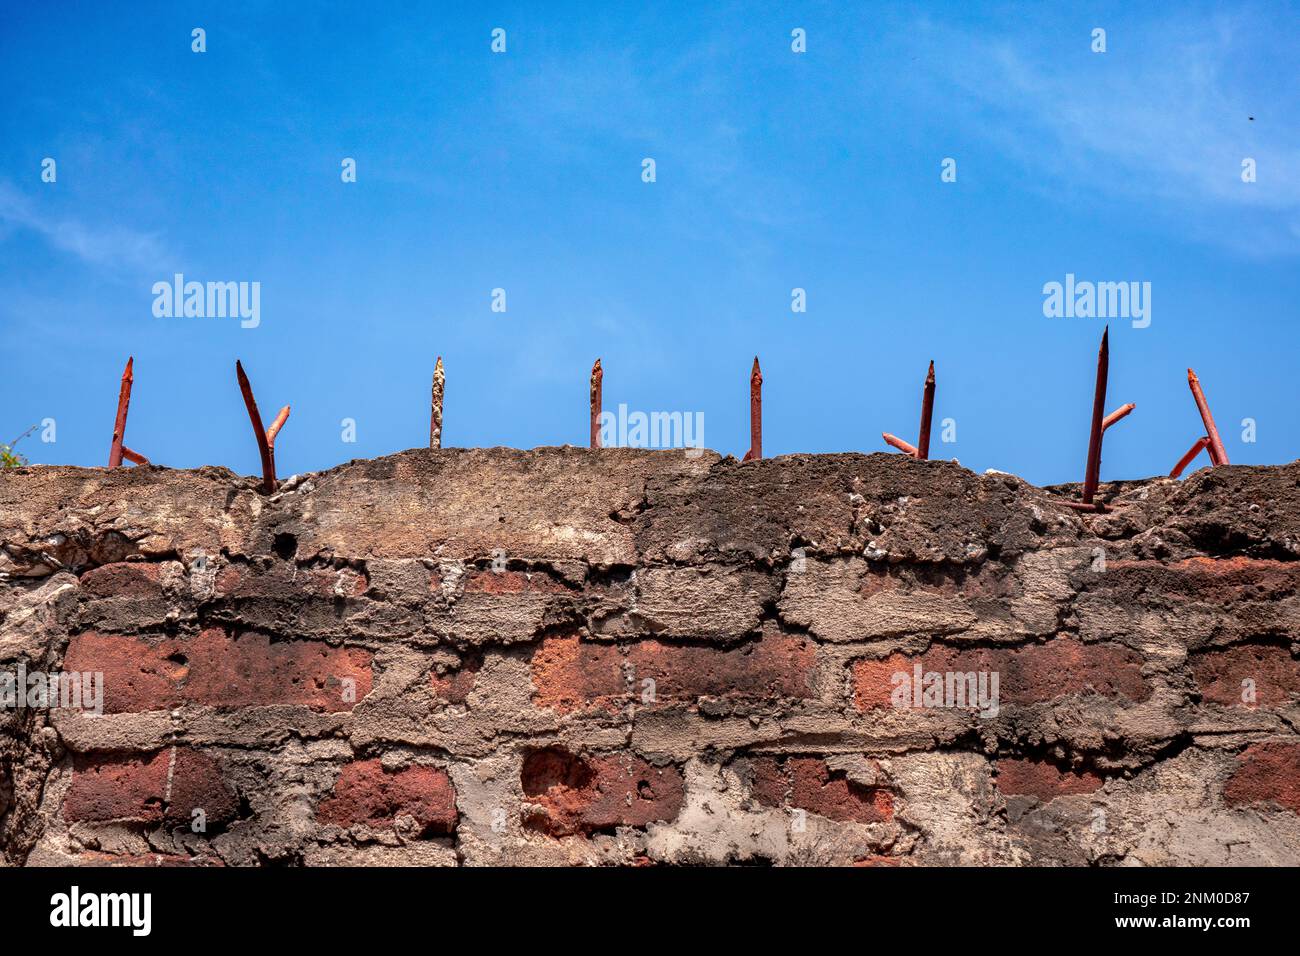 Red brick wall with sharp spikes on top. Clear blue sky with clouds. Theme for jail and freedom. Stock Photo